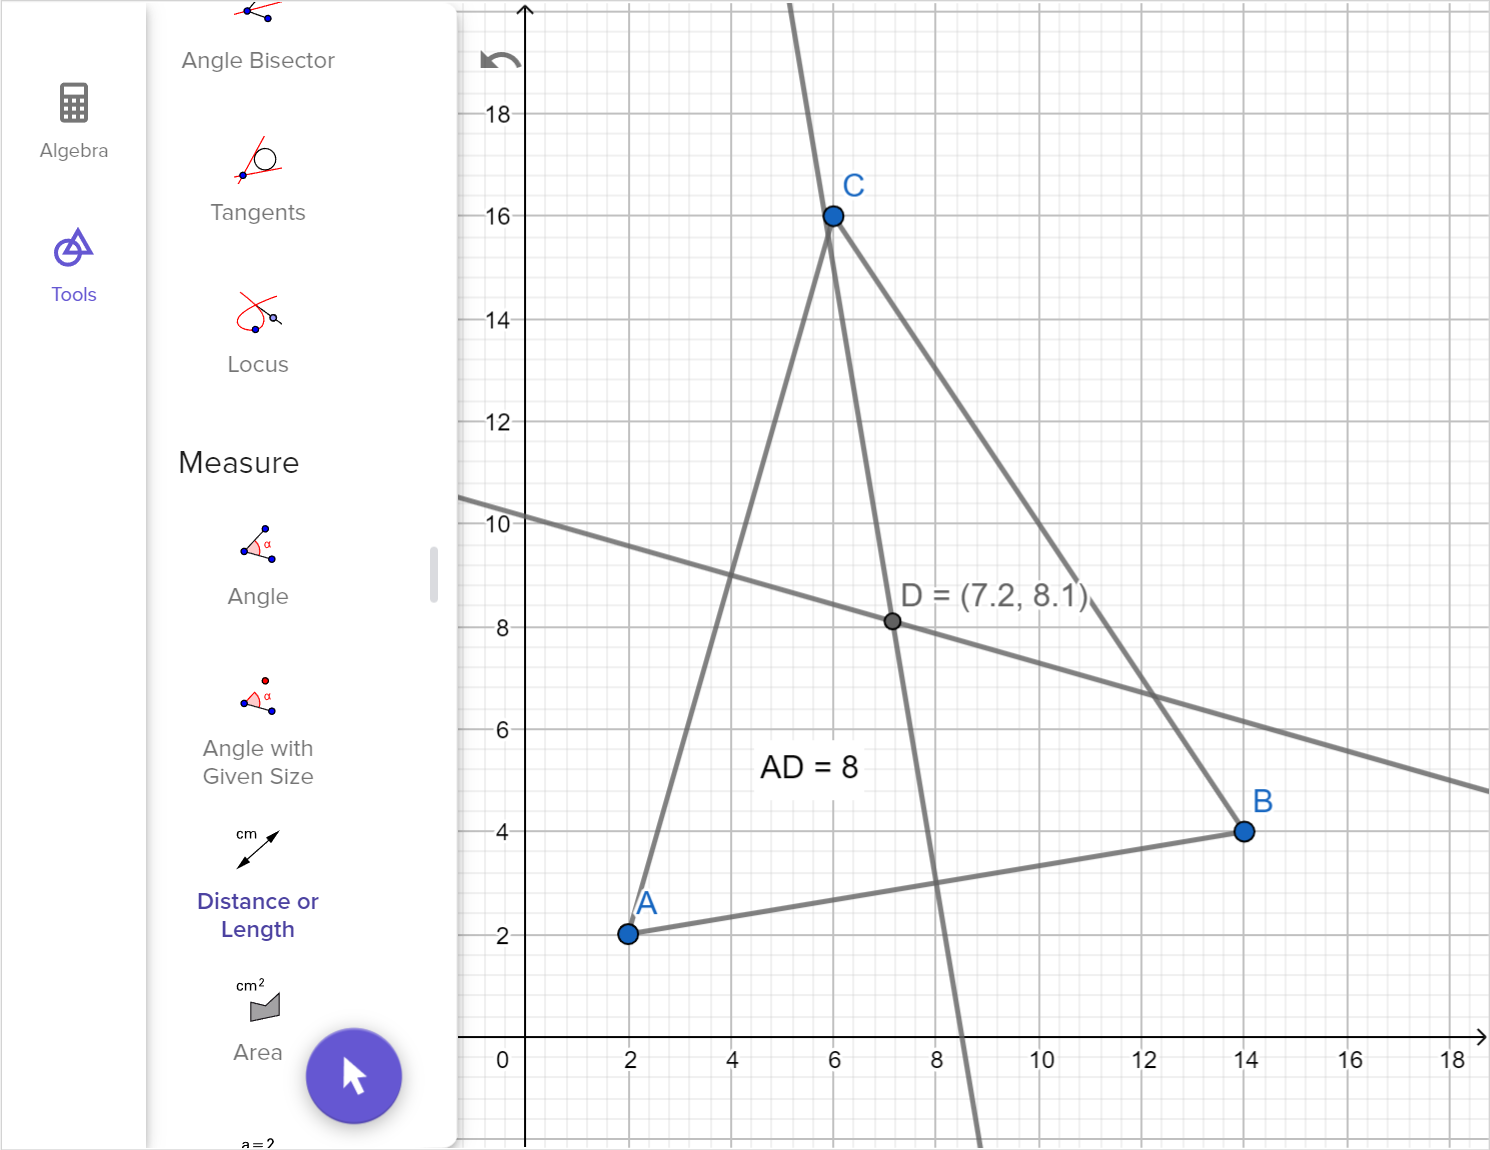 A screenshot of the GeoGebra geometry tool showing how to find the distance between point D and vertex A. Speak to your teacher for more details.